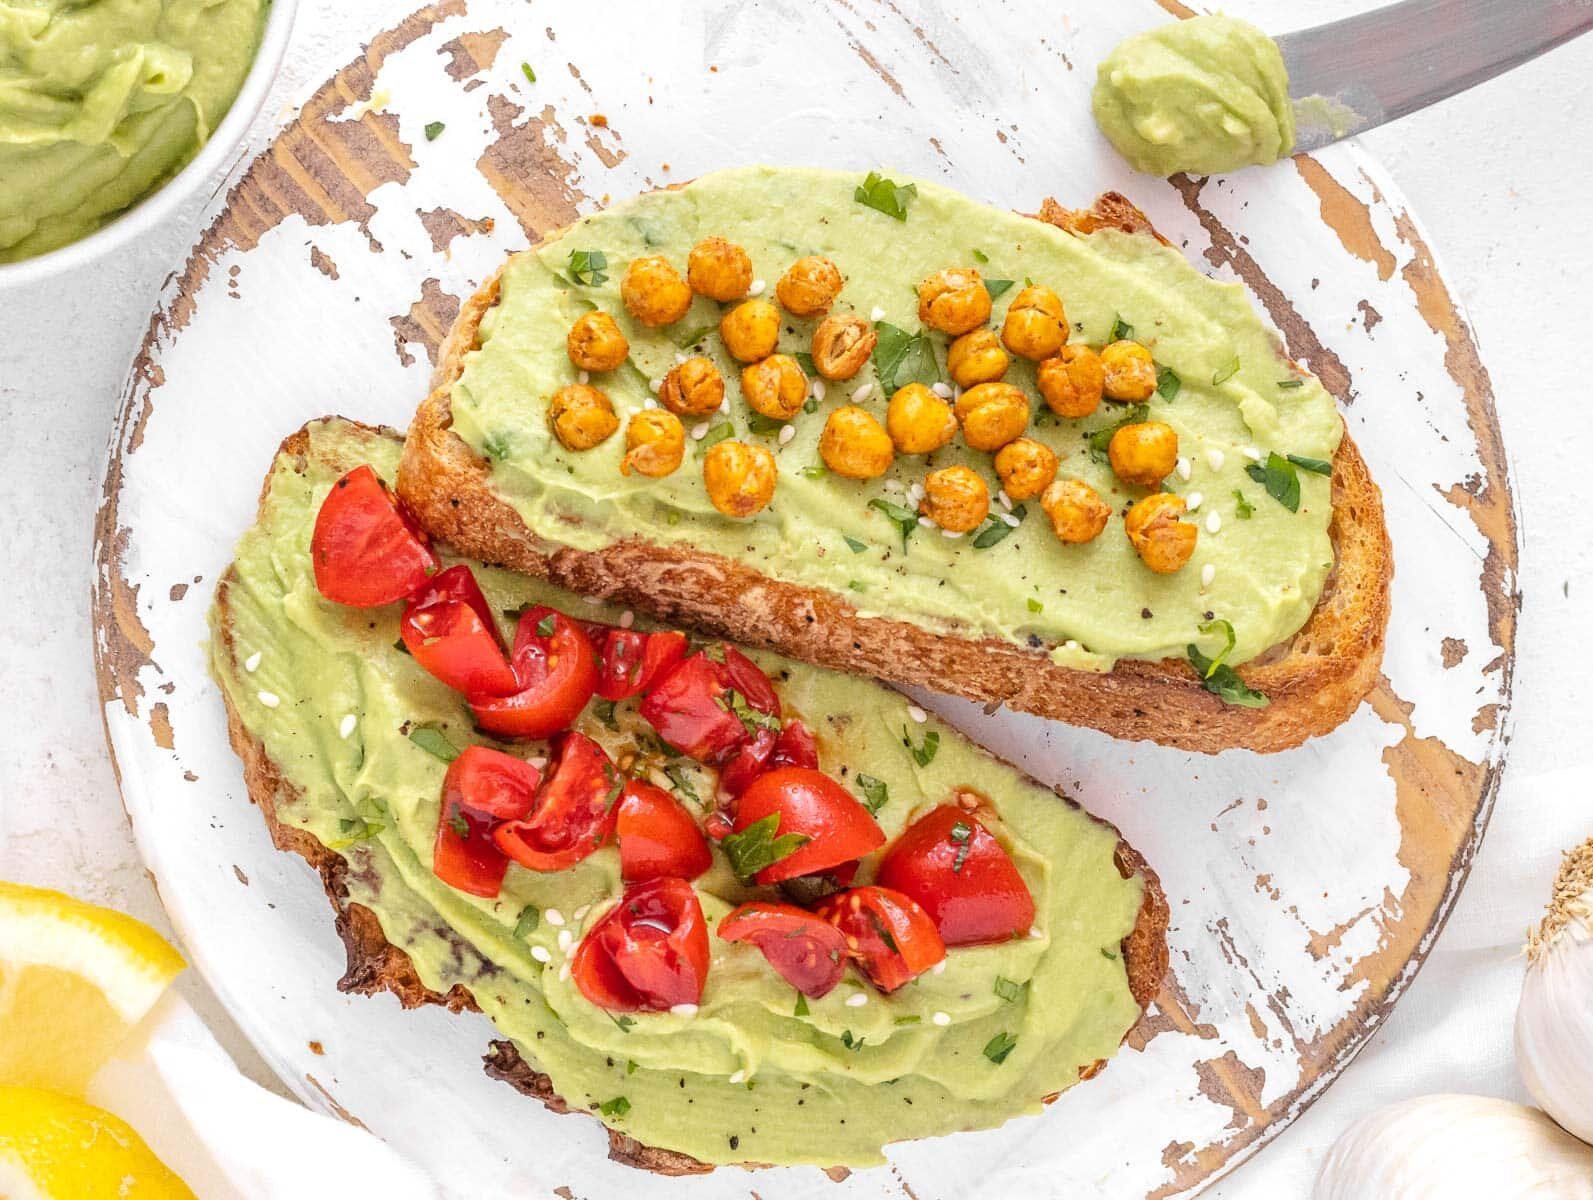 Avocado toast with spread and vegetables